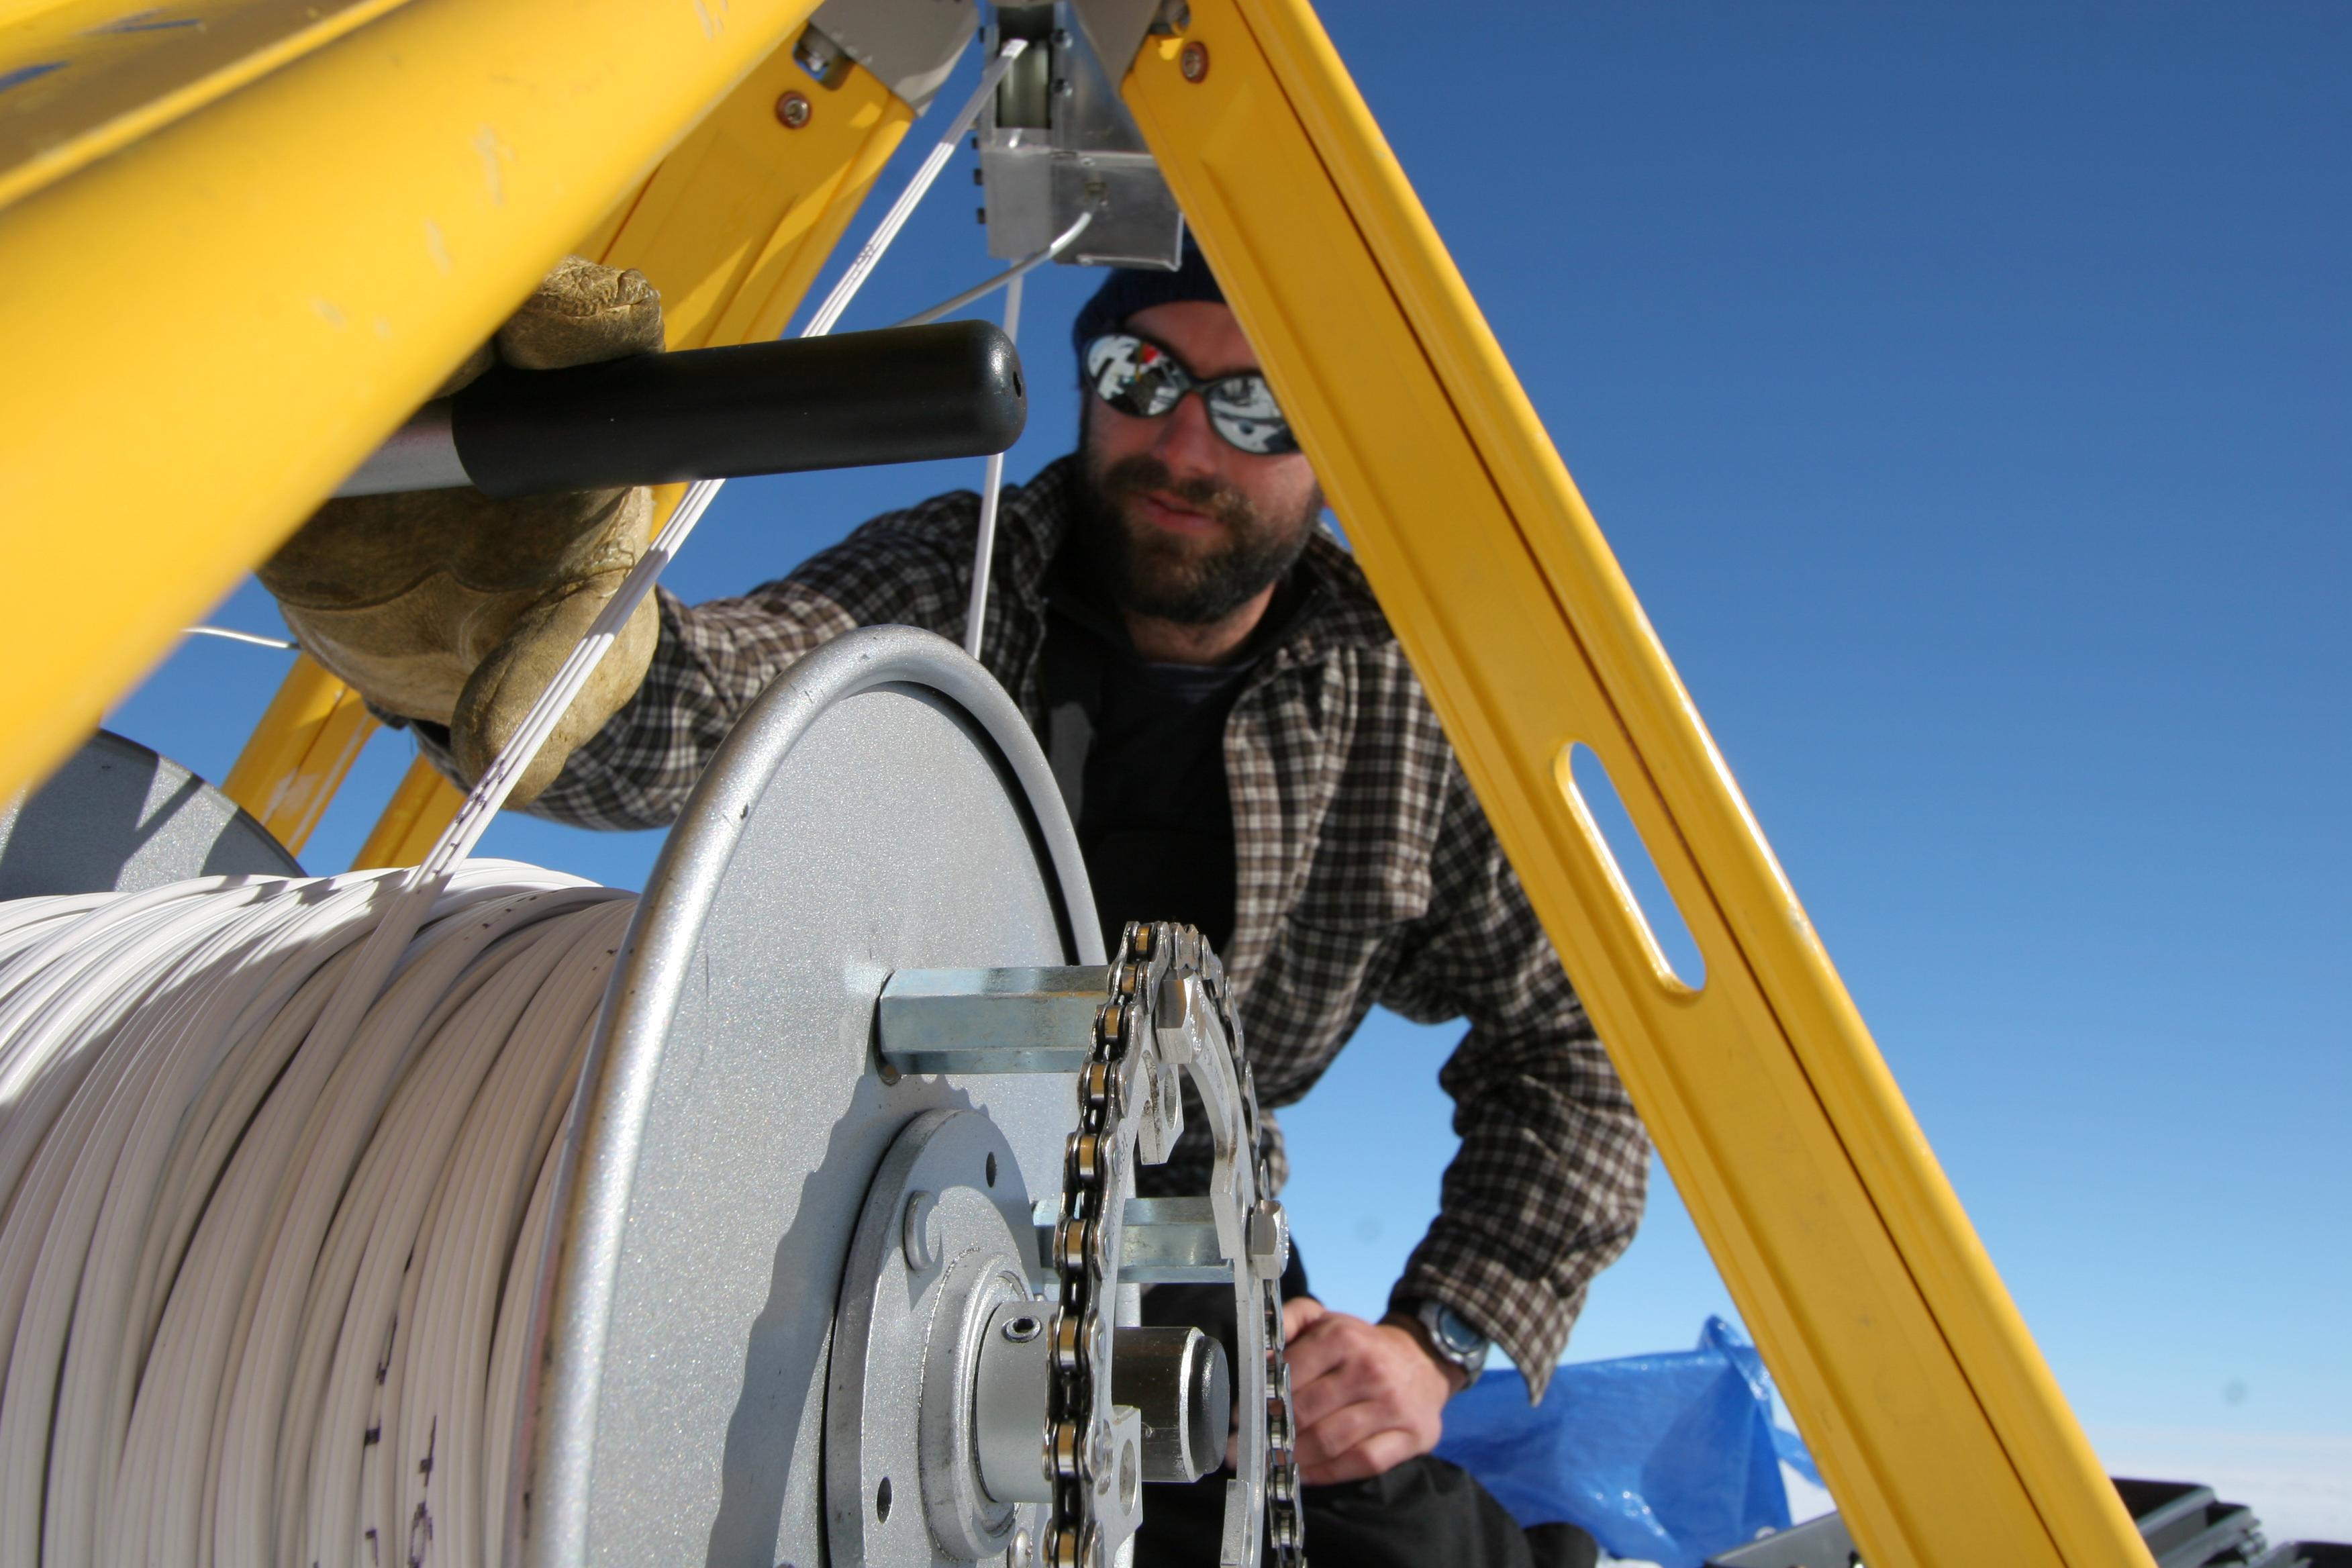 Ben Smith (U. Washington) lowers a video camera into a borehole at the WAIS Divide field camp in West Antarctica